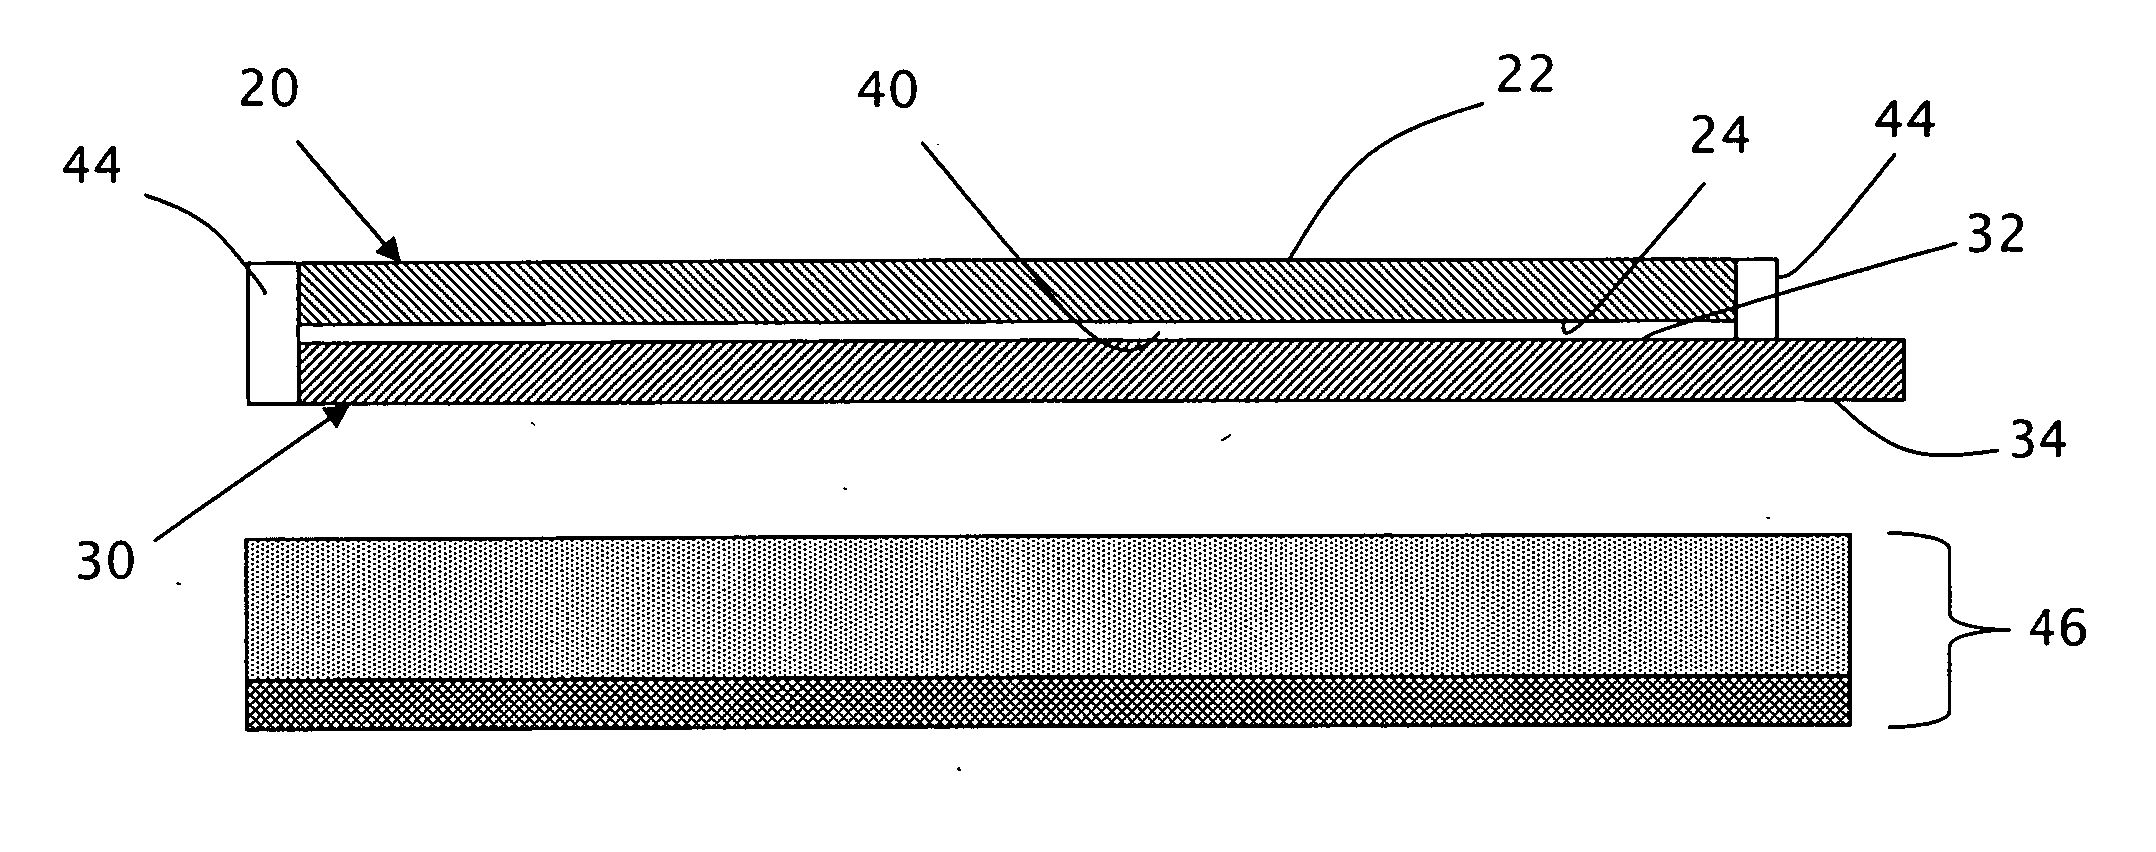 Glass laminate substrate having enhanced impact and static loading resistance